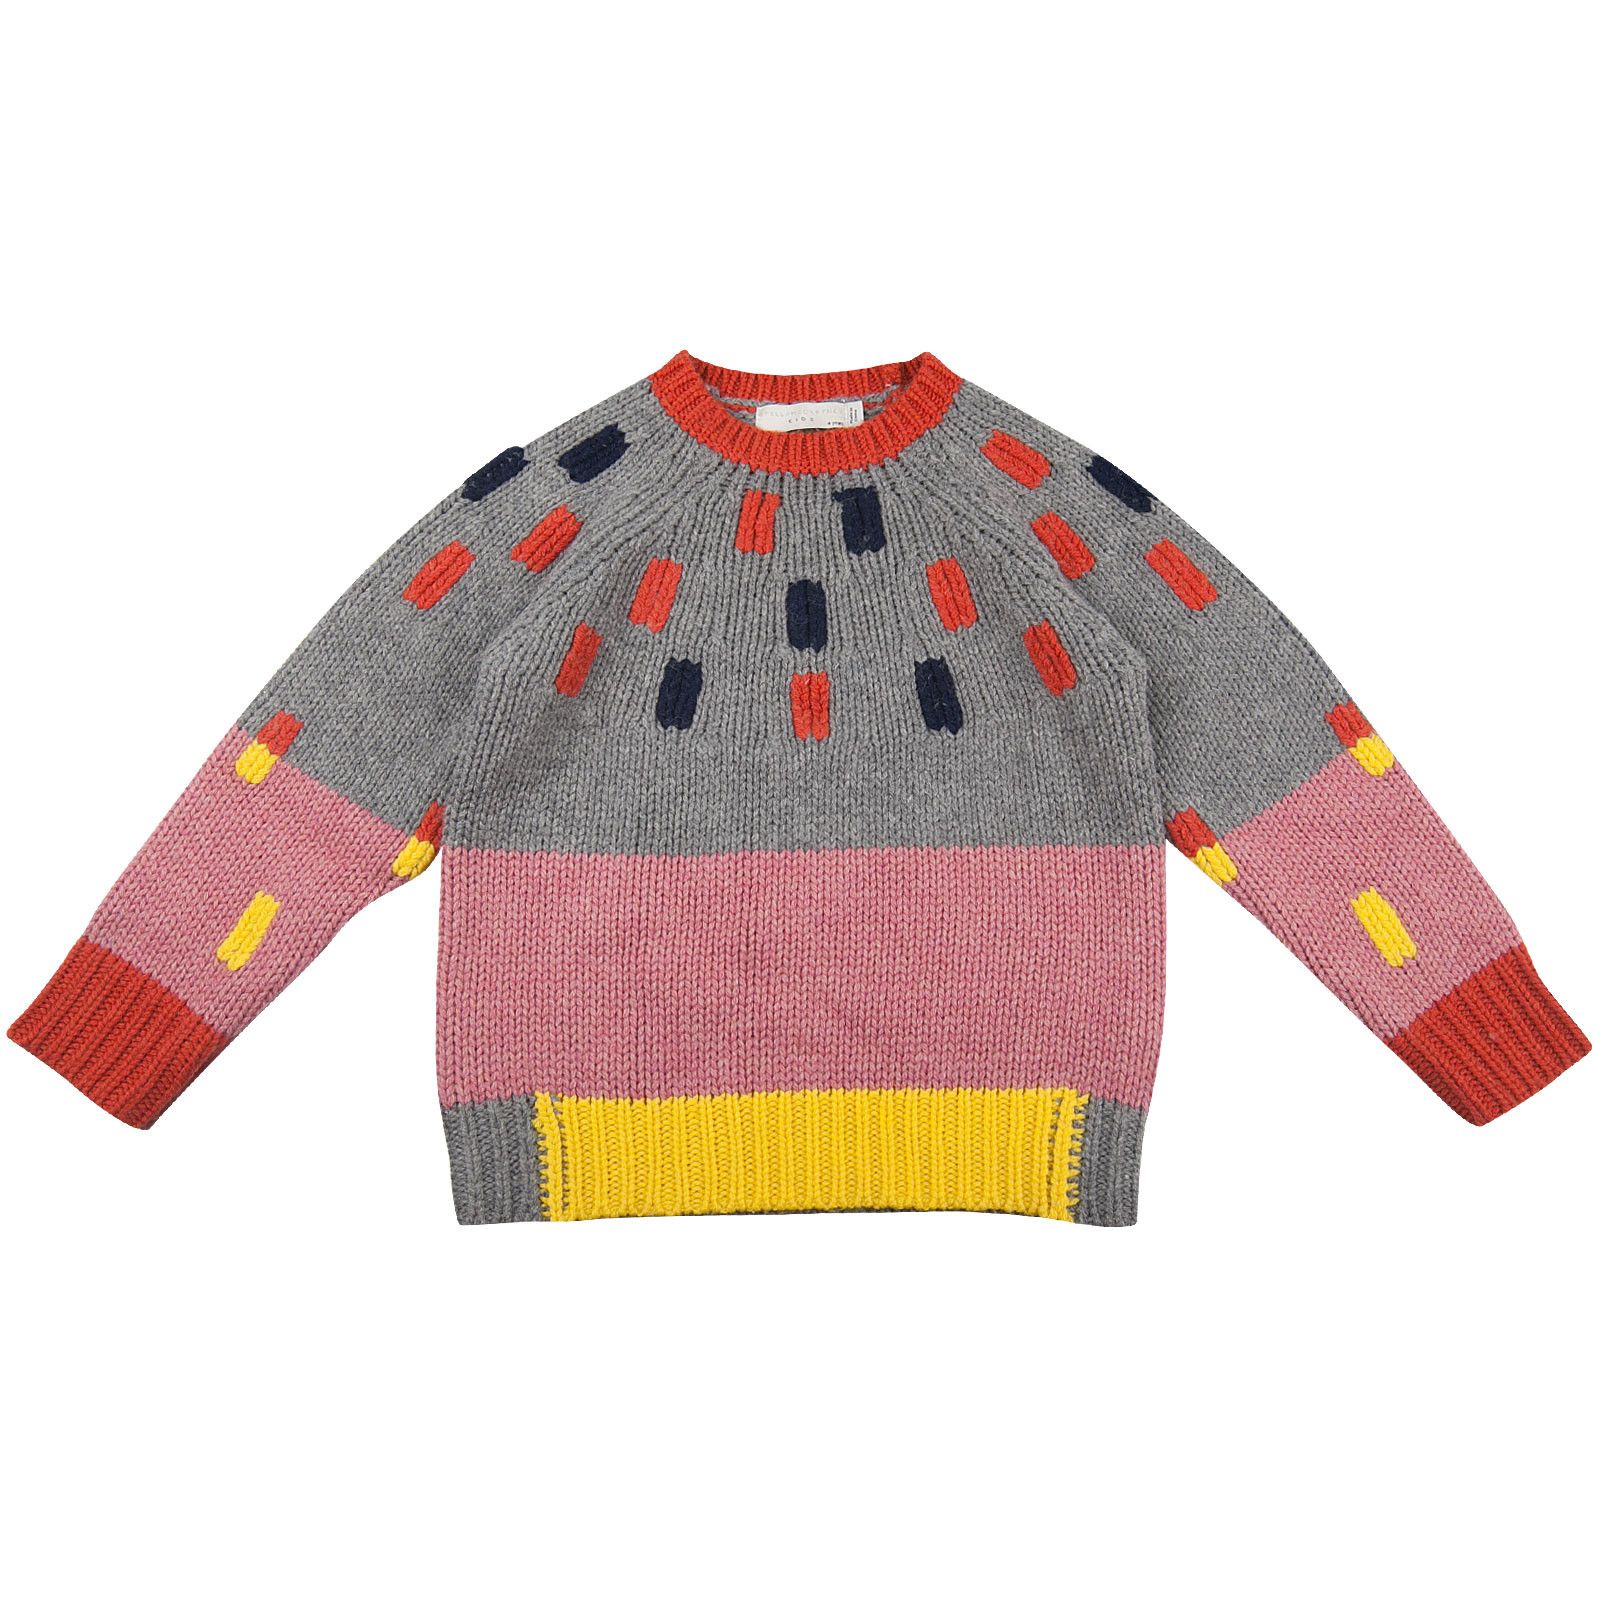 Freddie Girls Grey&Red Wool Sweater With Red And Blue Trims - CÉMAROSE | Children's Fashion Store - 1